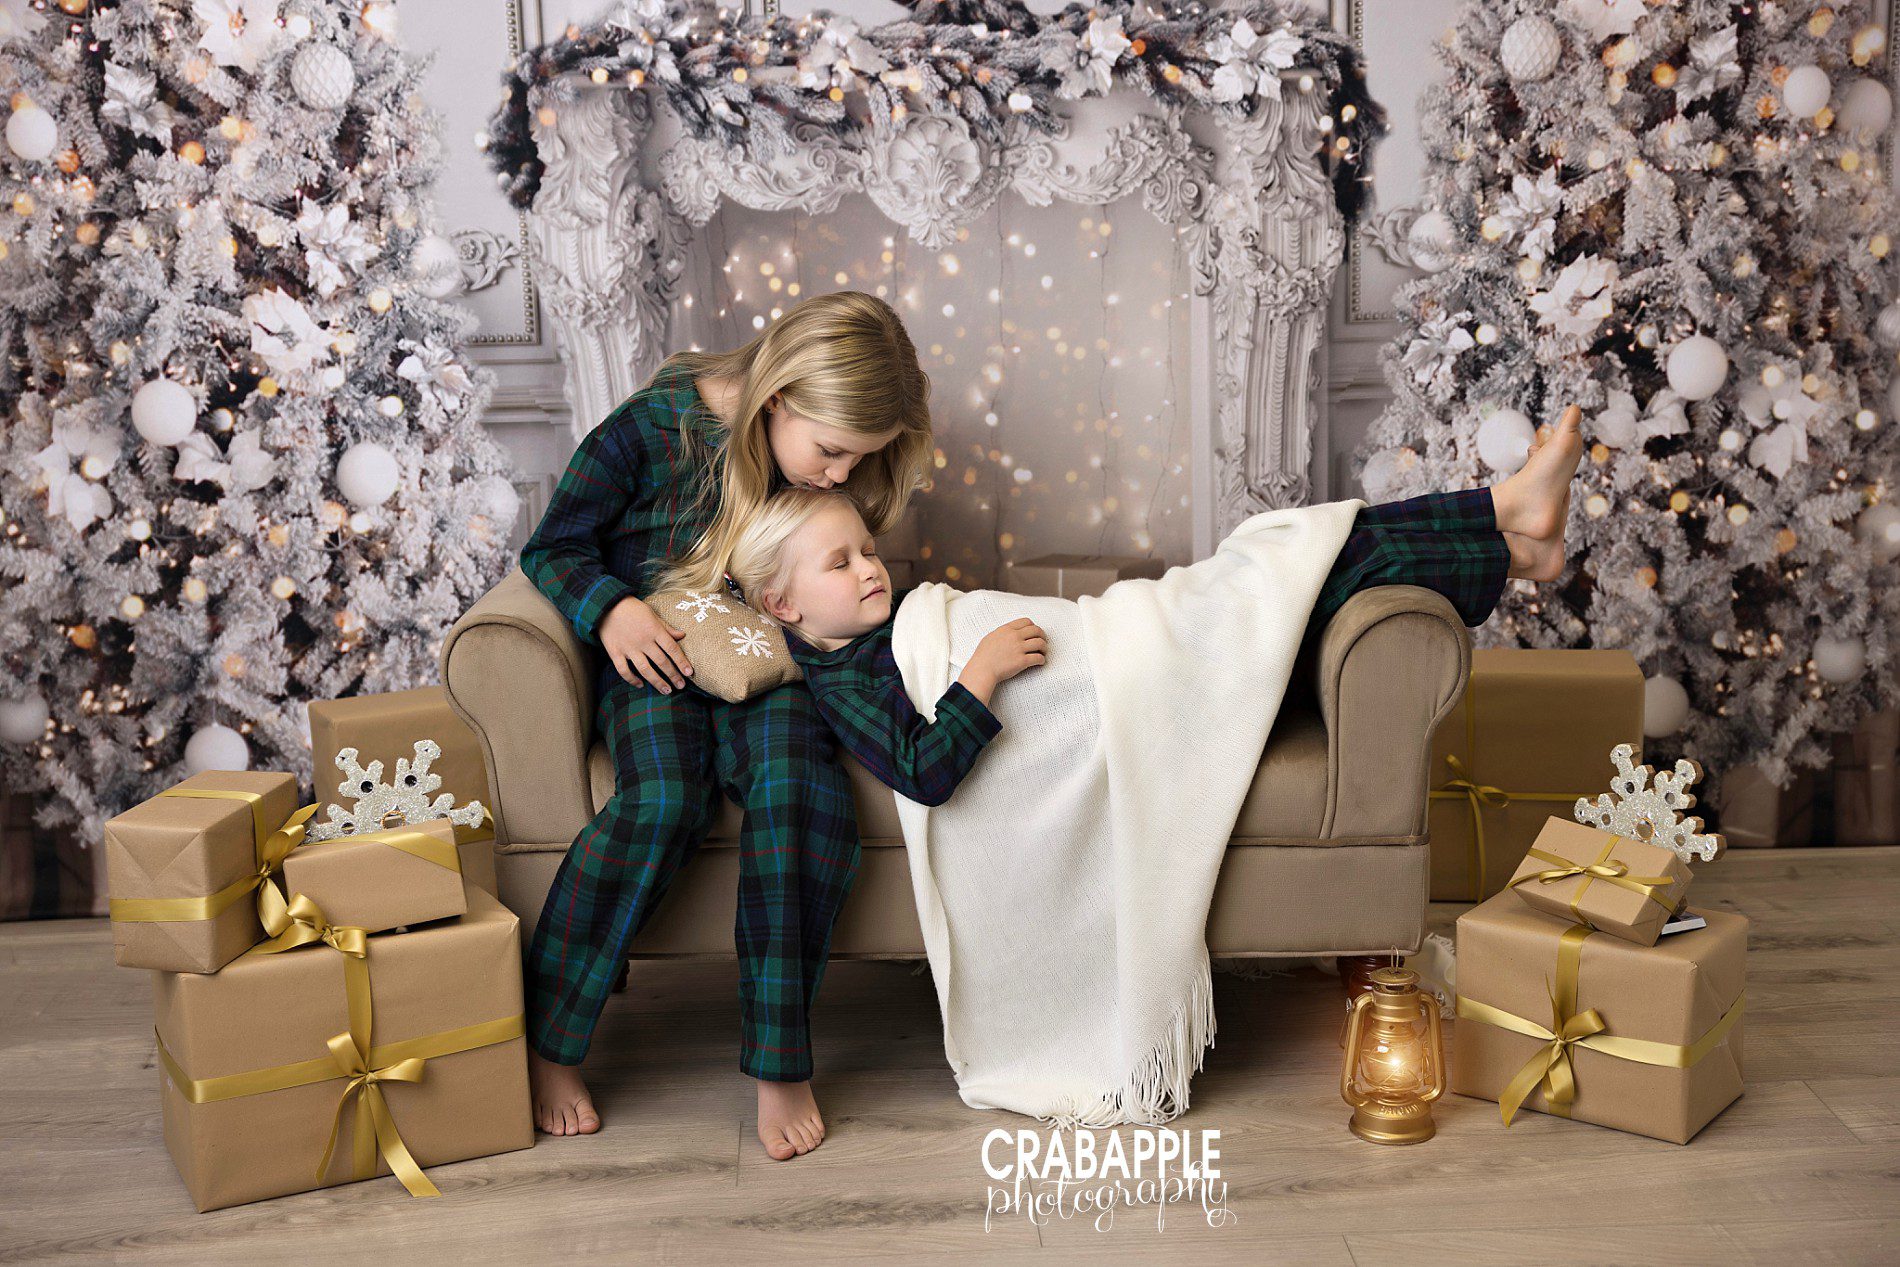 sweet poses and ideas for sister christmas photos